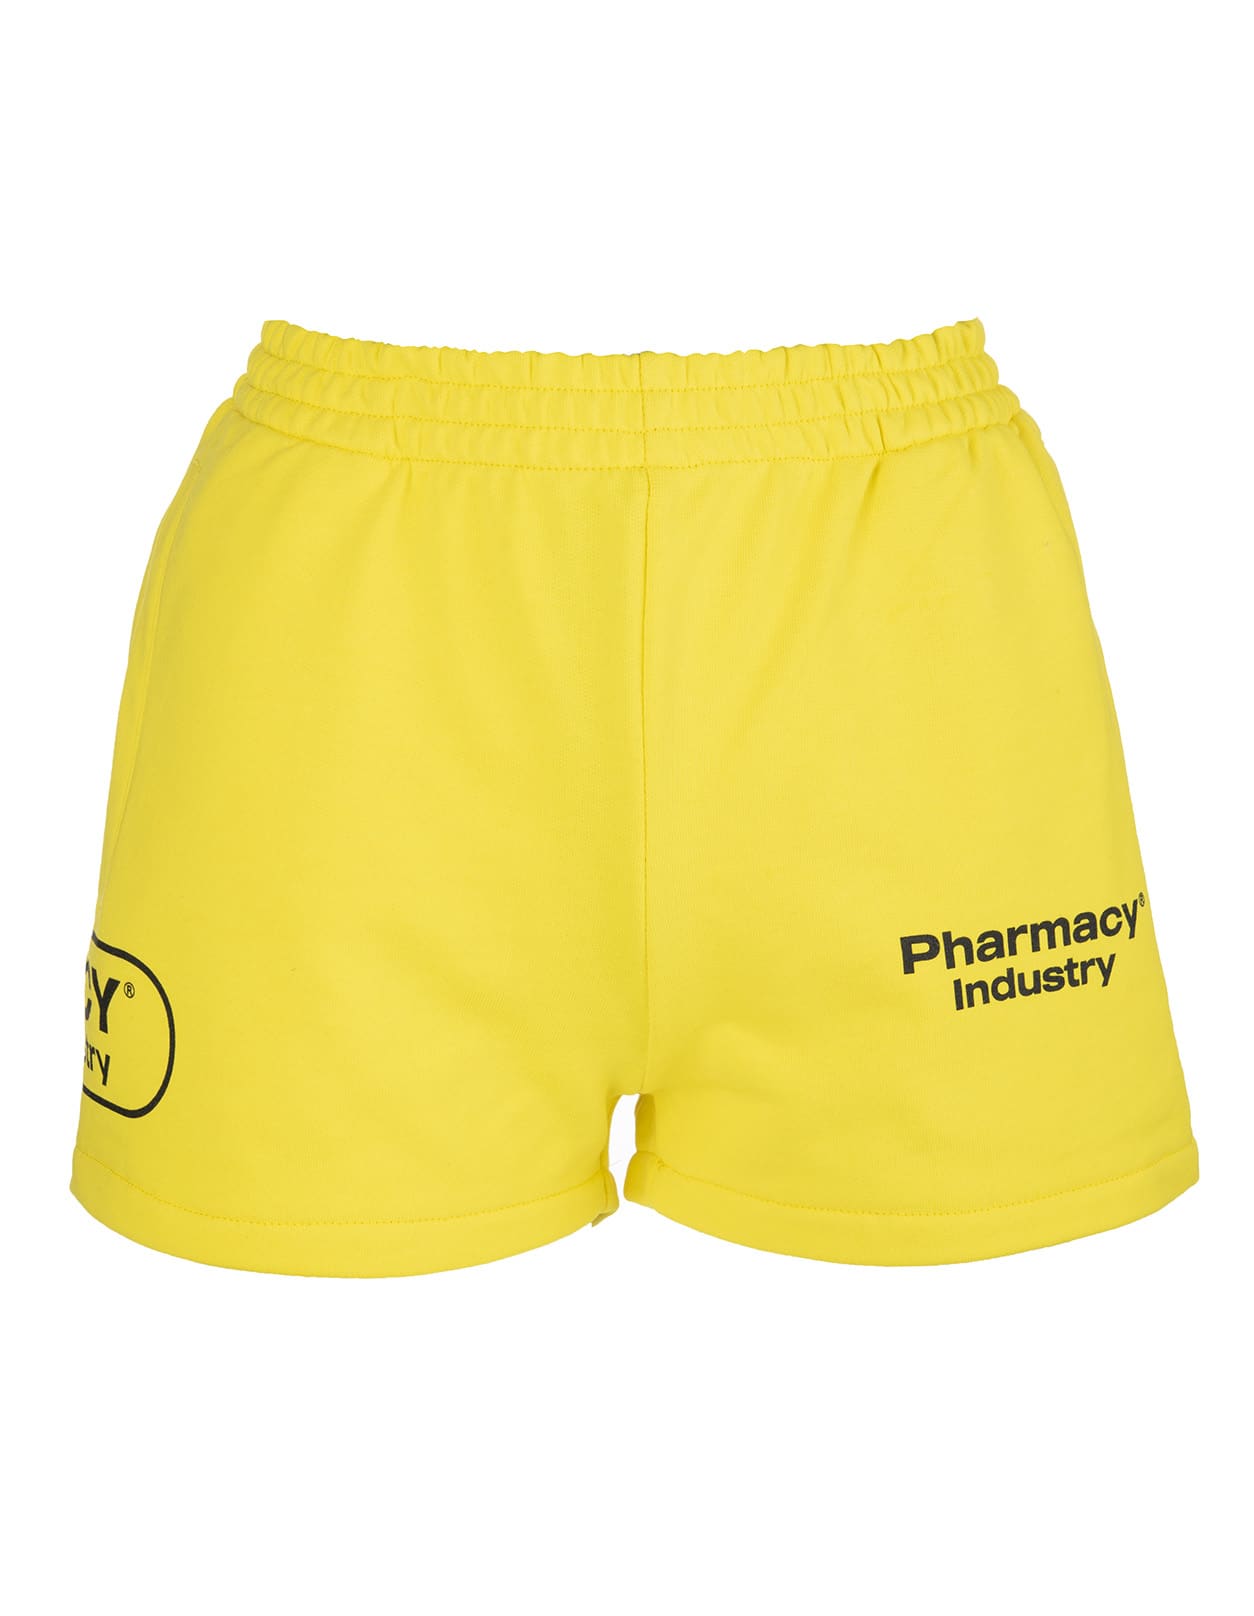 Pharmacy Industry Woman Yellow Shorts With Logos